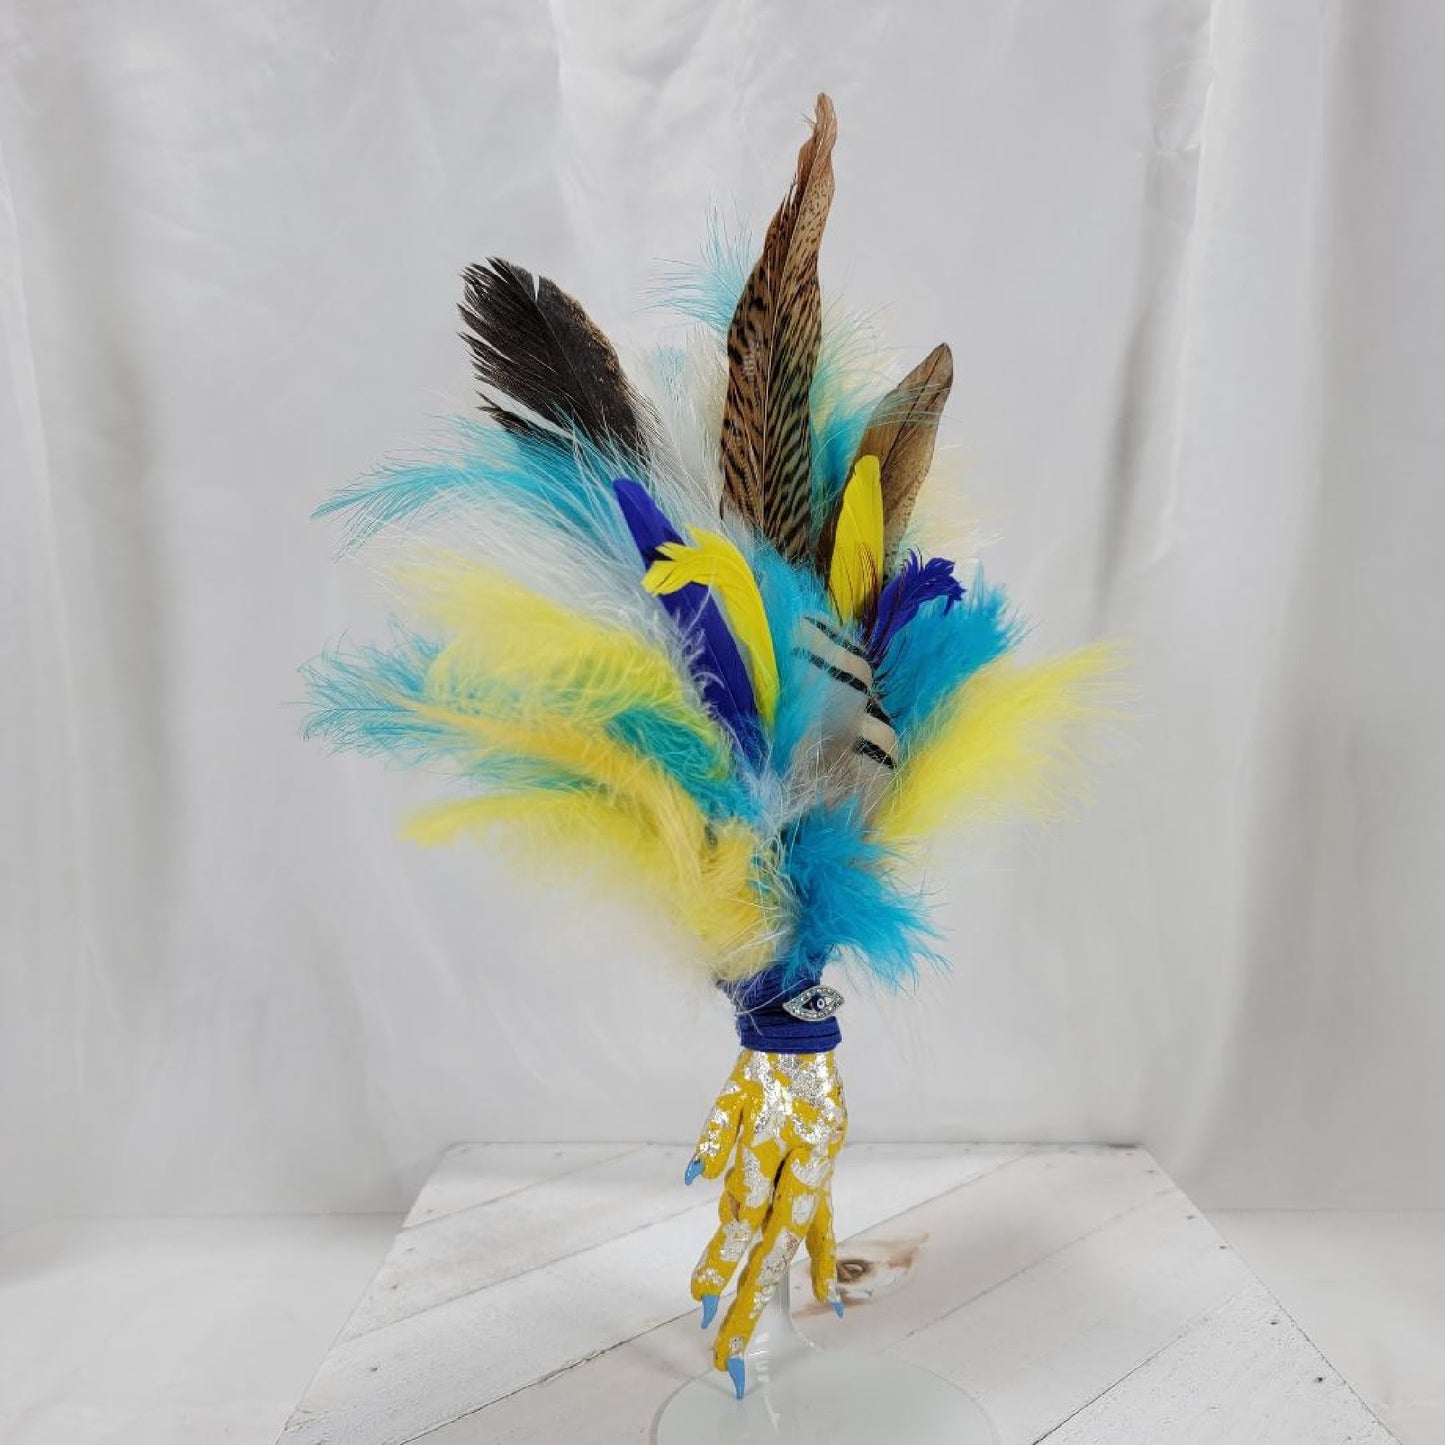 Chicken Foot JuJu Charm - Yellow and Blue